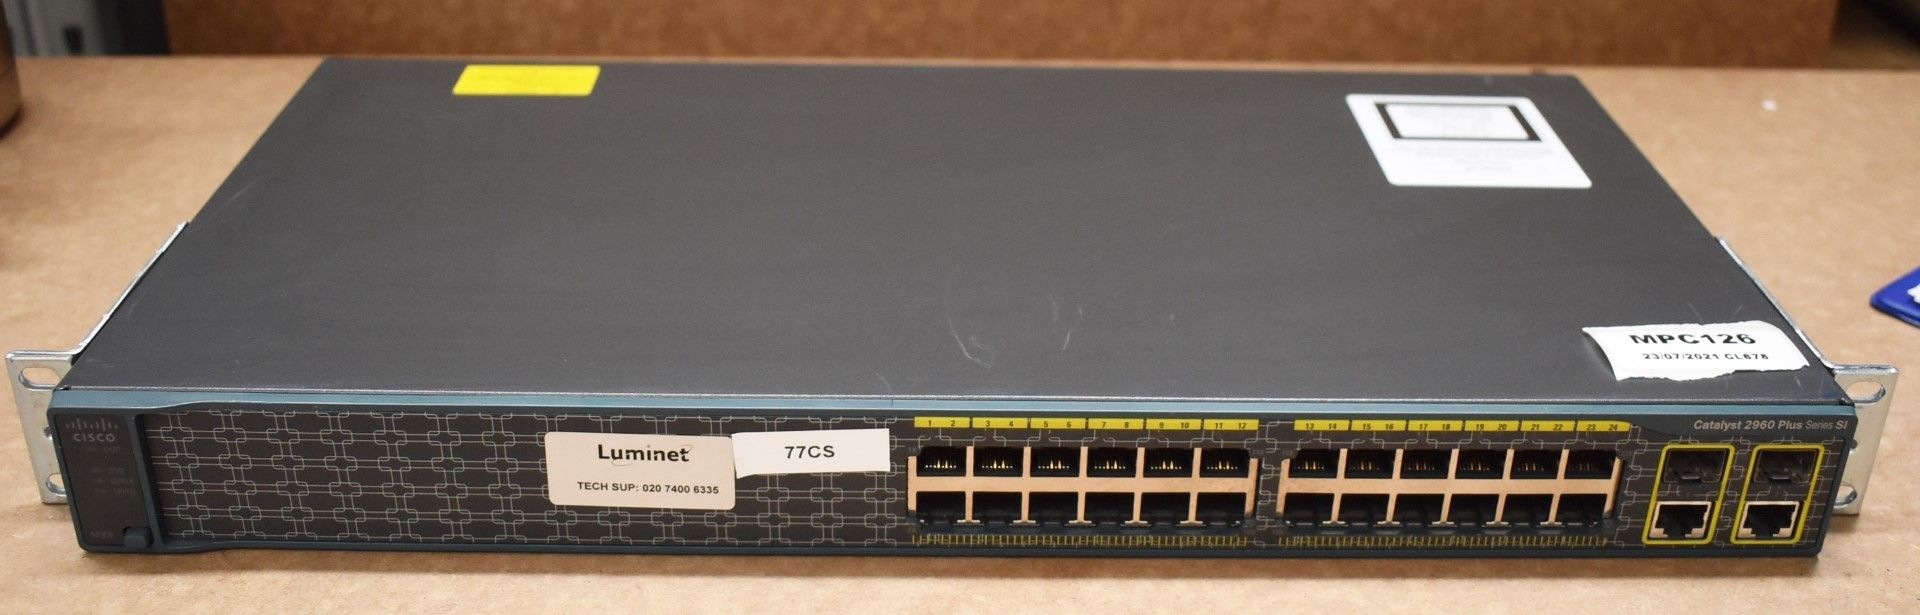 1 x Cisco Catalyst 24 Port Ethernet Switch - Model WS-2960+24TC-S V01 - Includes Power Cable - - Image 2 of 6